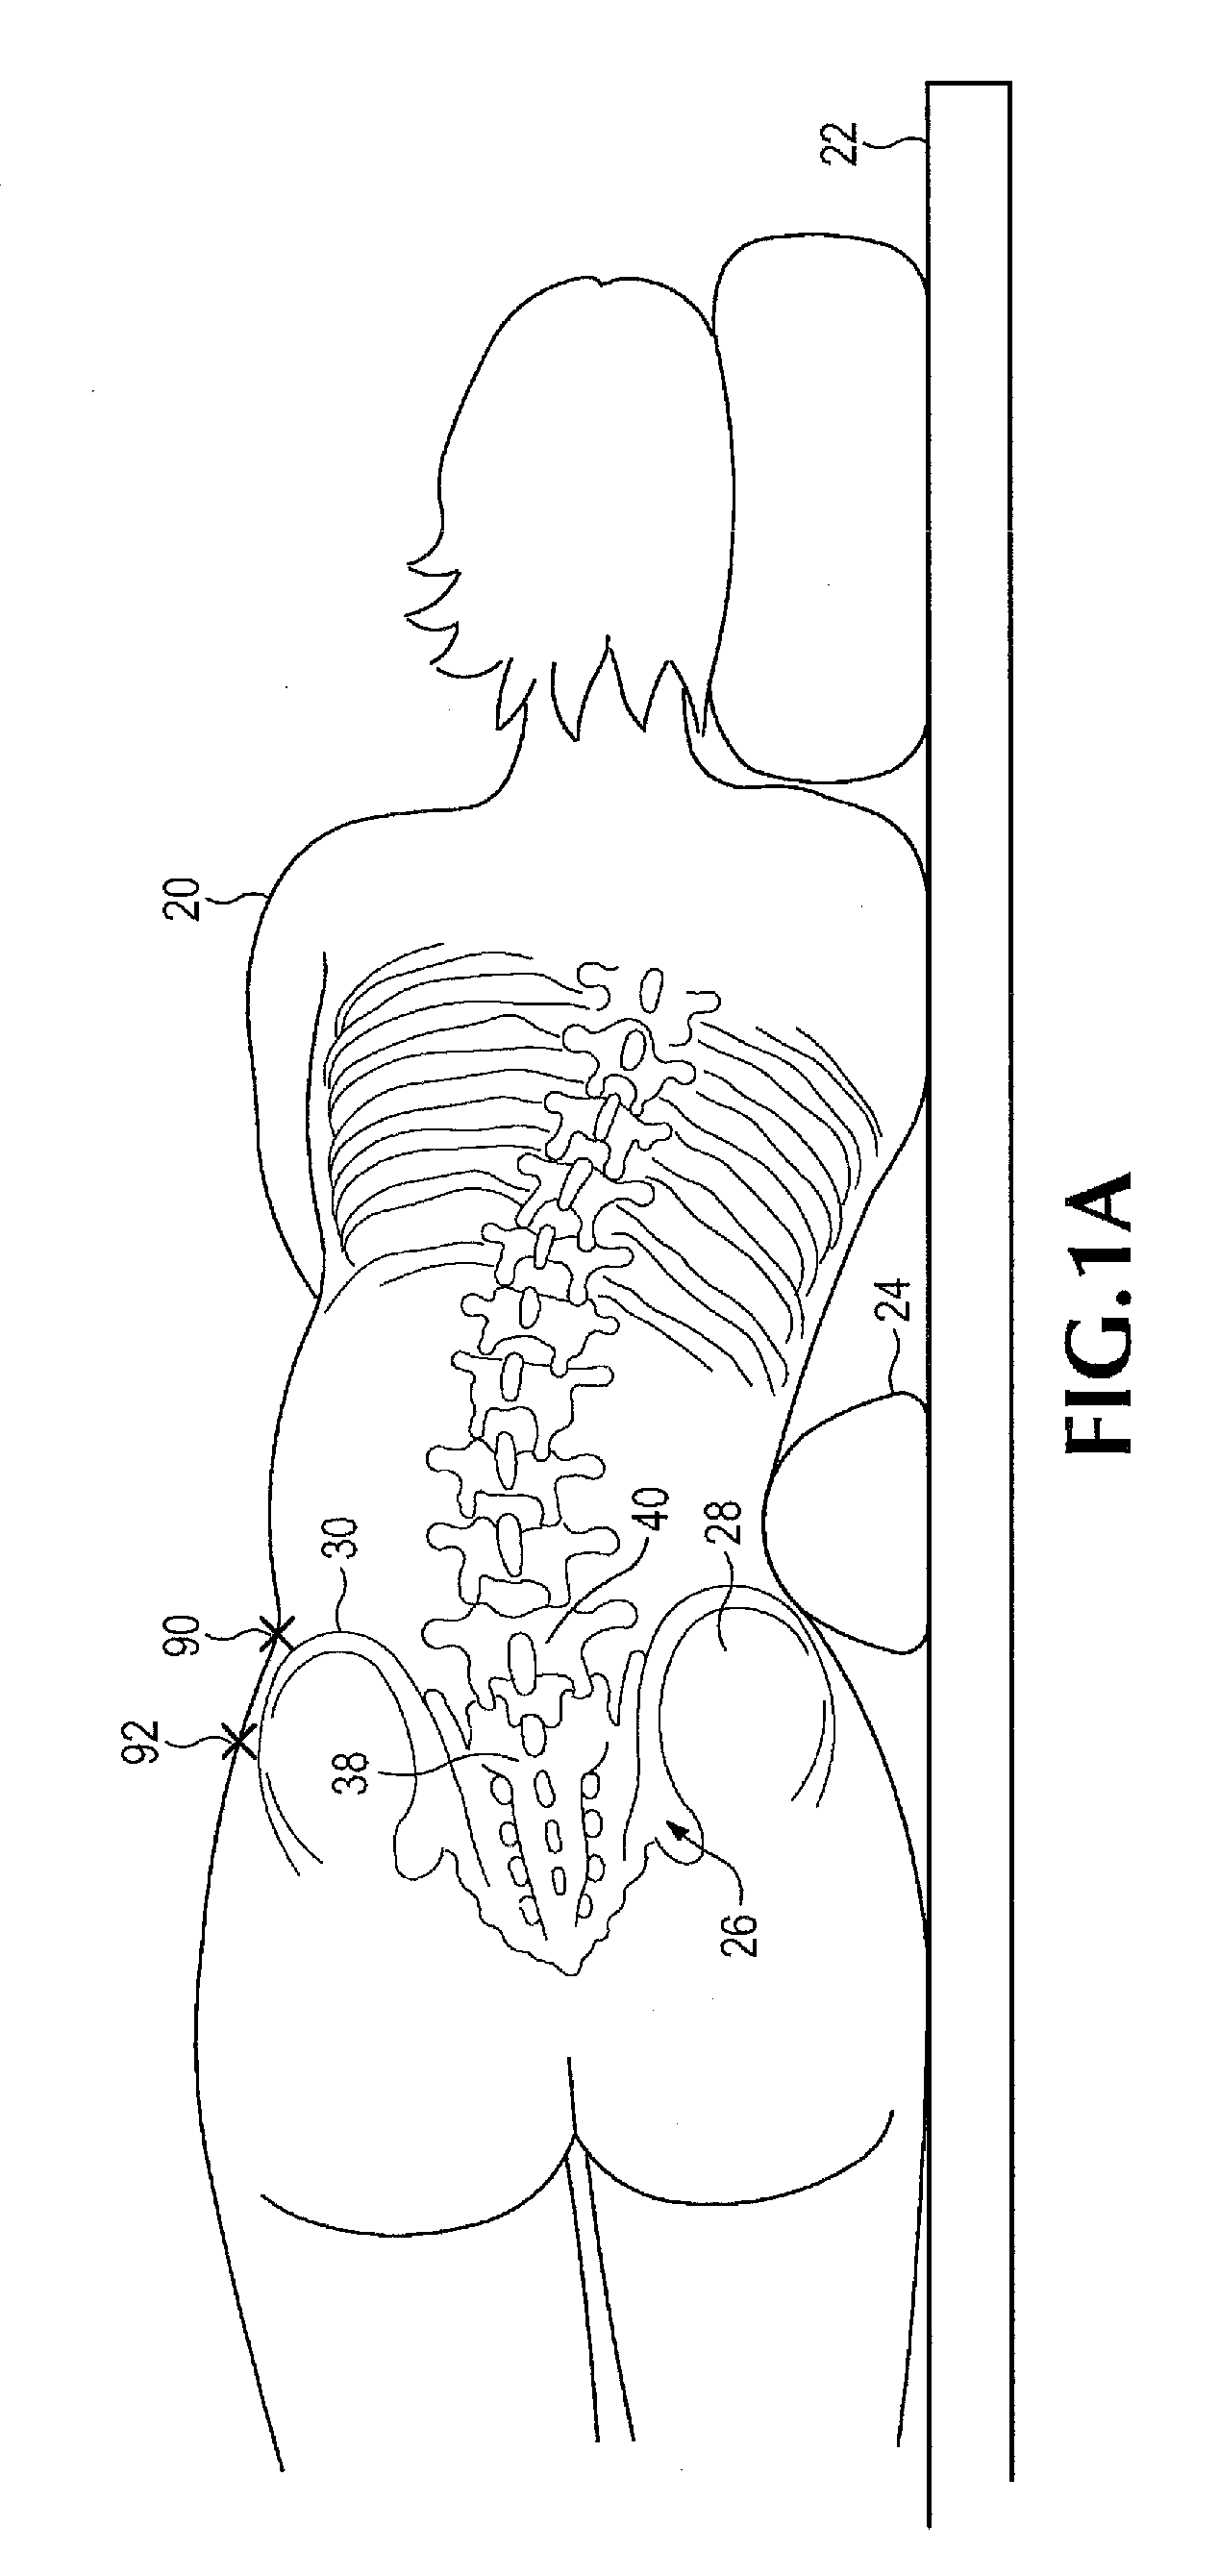 Spinal implant for use during retroperitoneal lateral insertion procedures